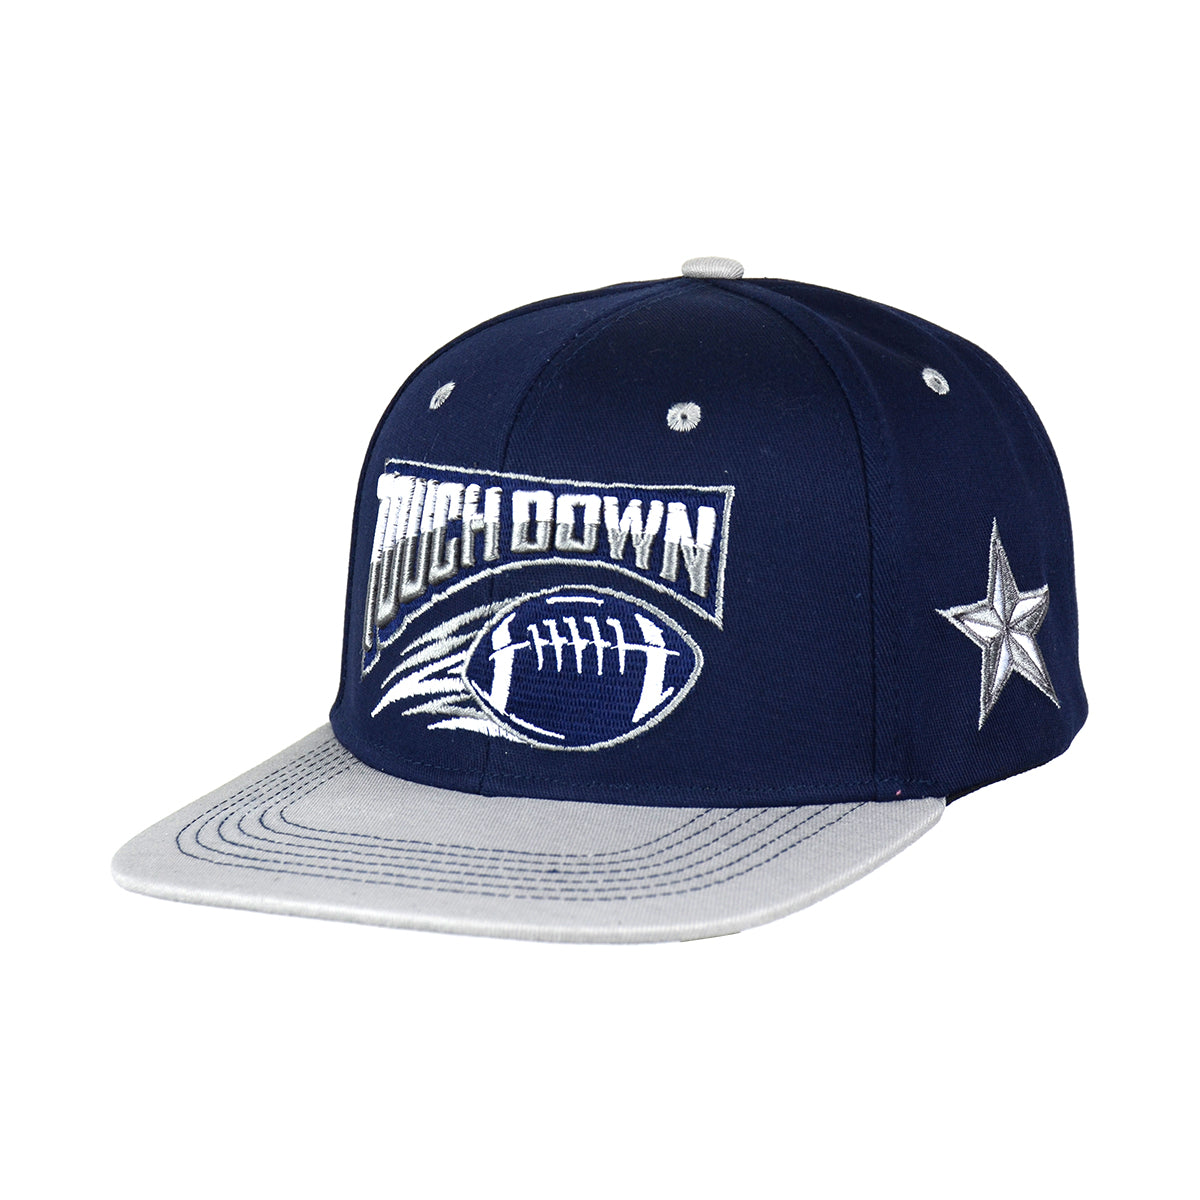 Snapback "Touch Down" Hat Embroidered